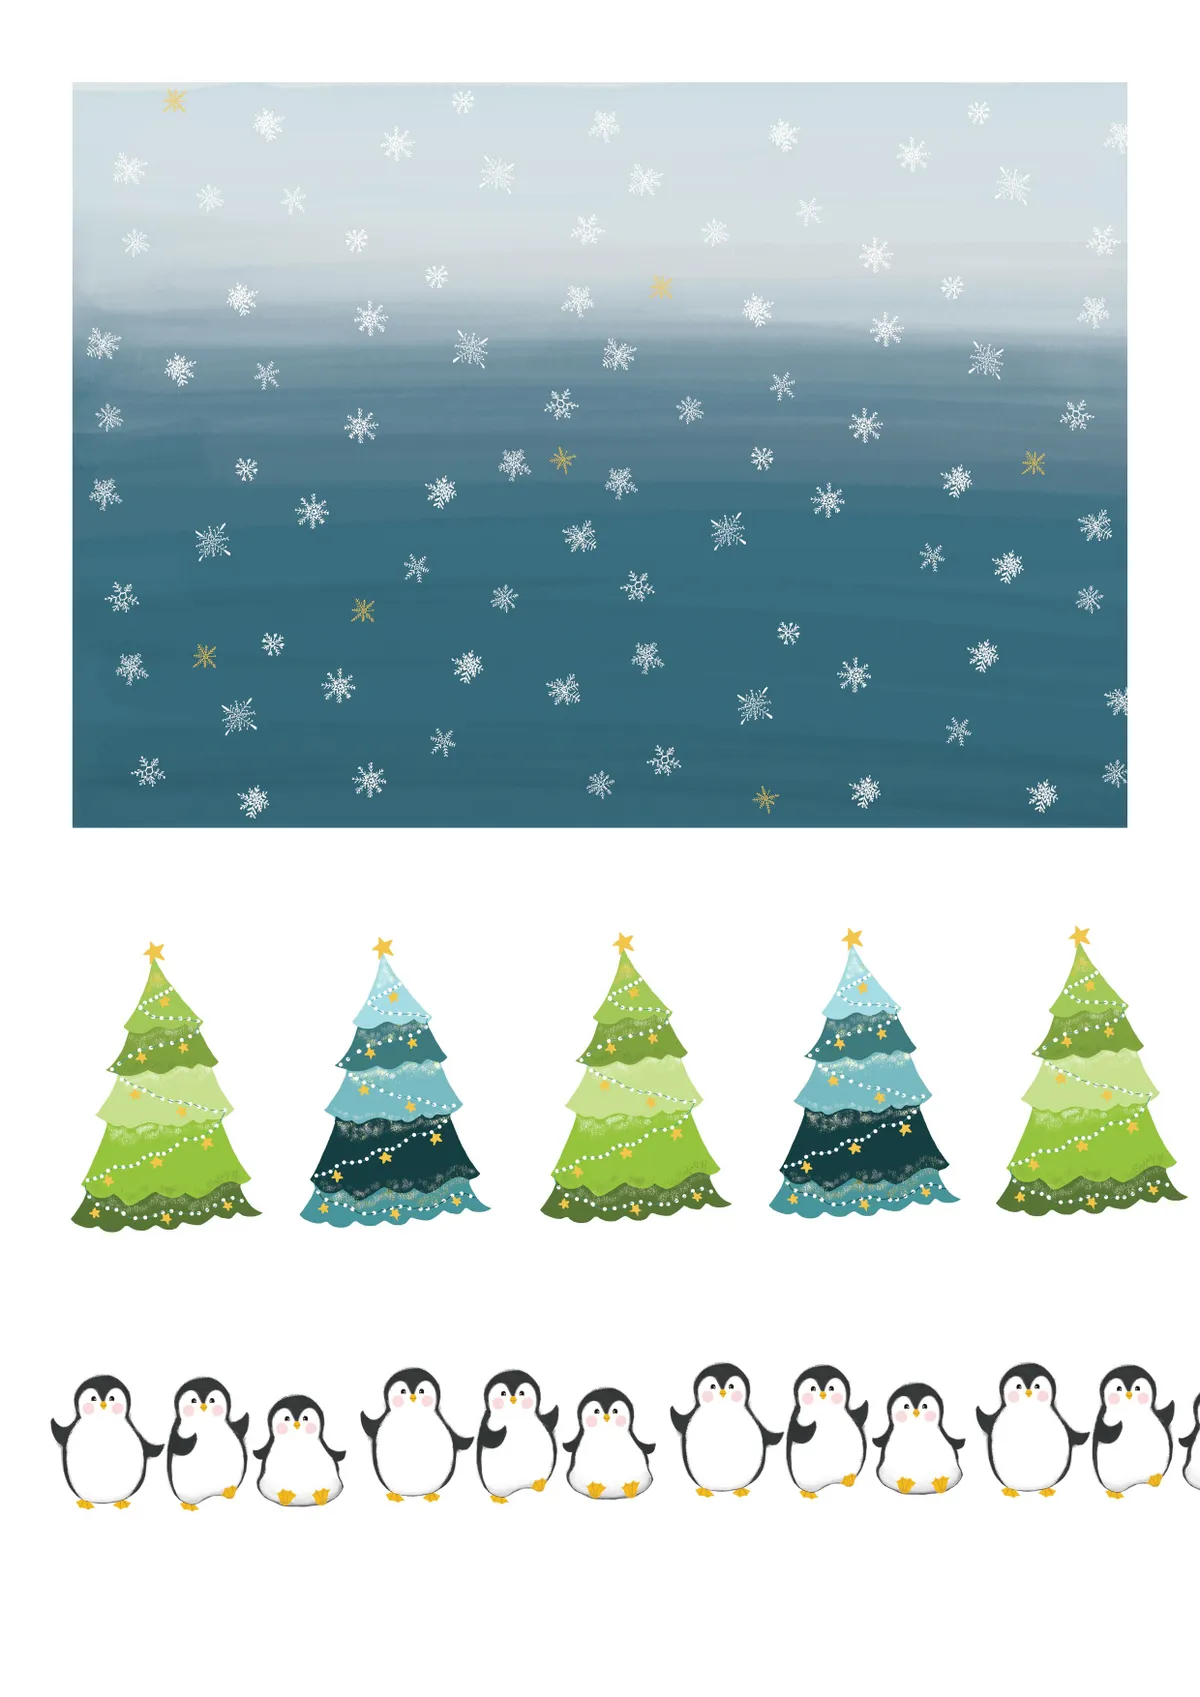 Penguins printables sheet 2 sky and trees